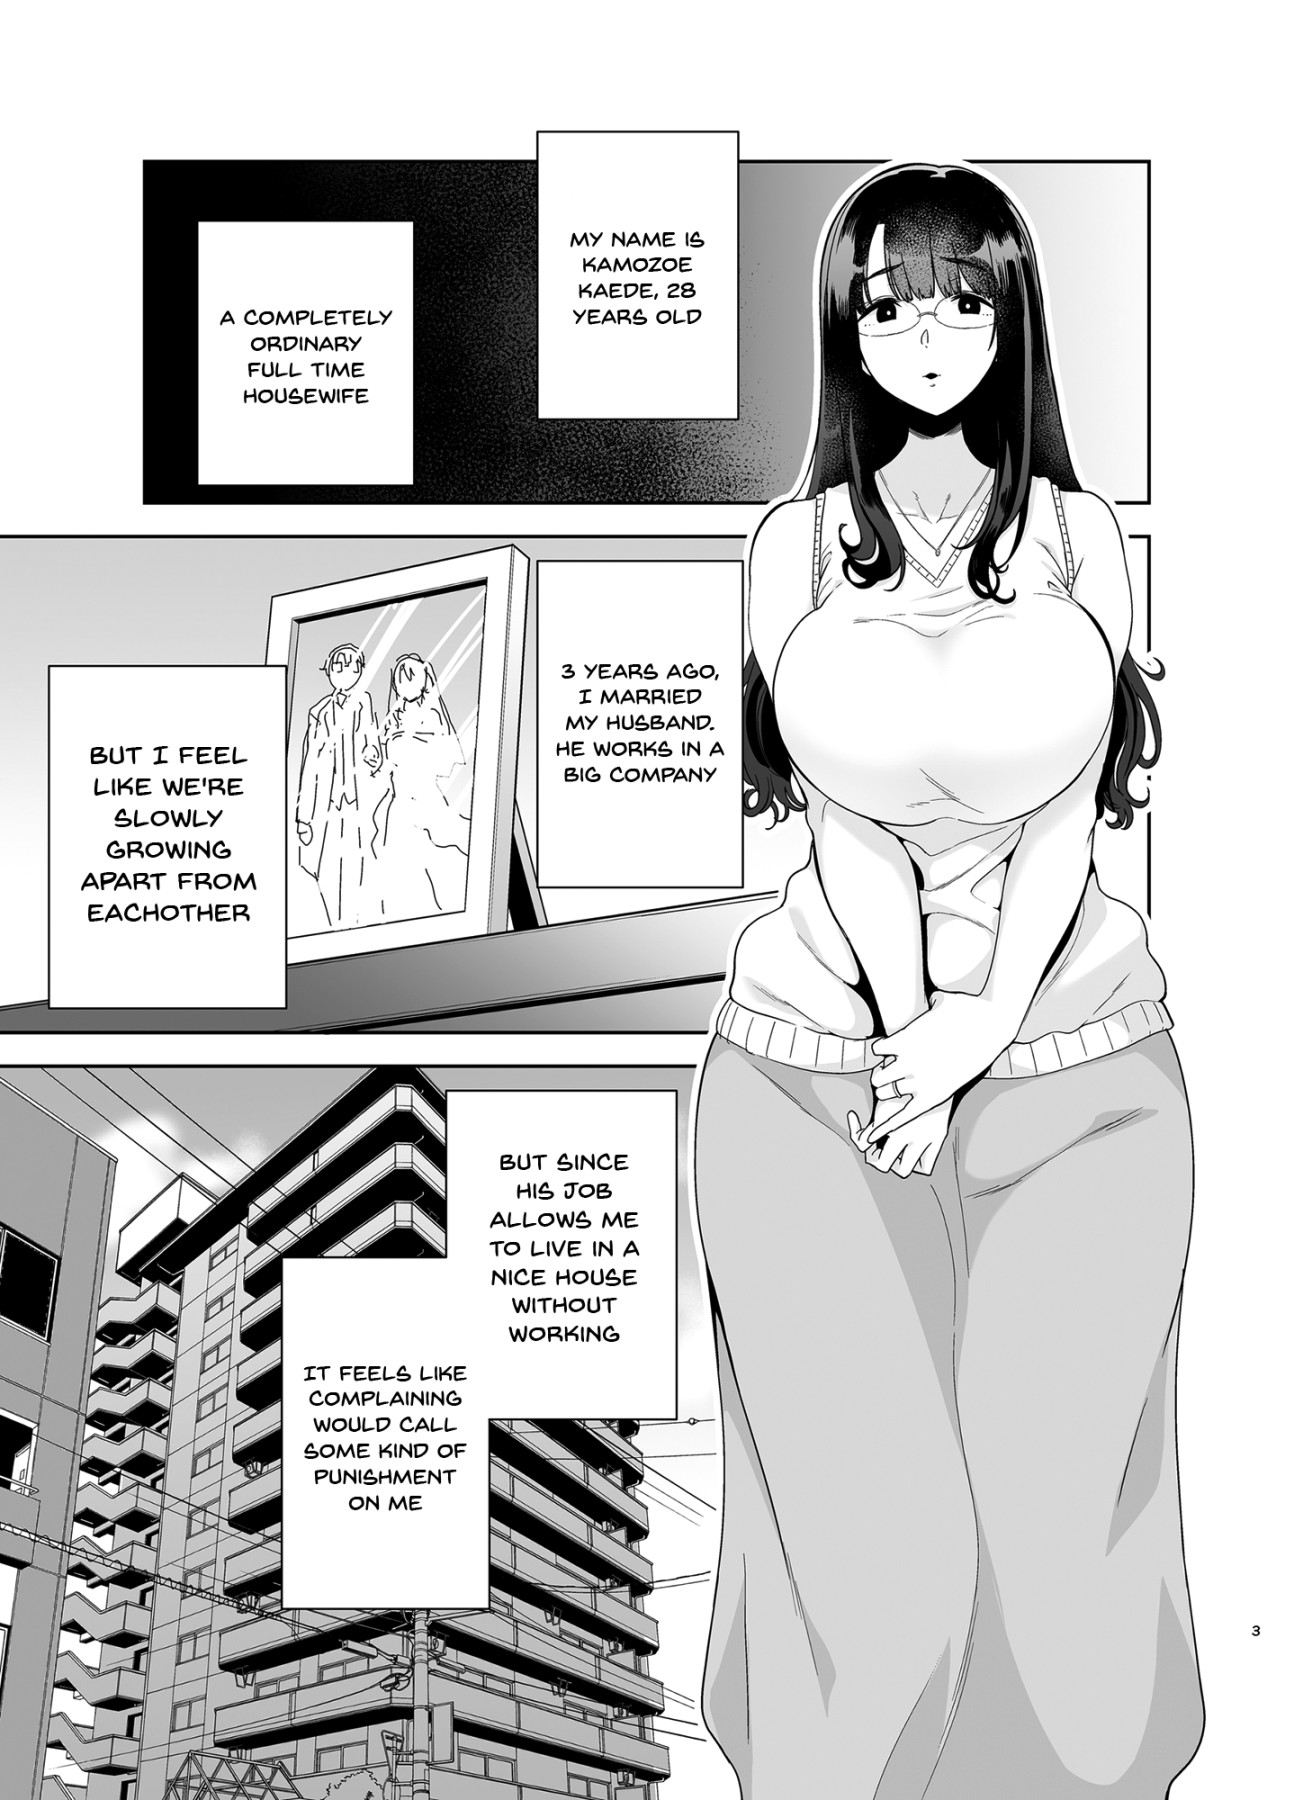 Hentai Manga Comic-Wild Method - How to Steal a Japanese Housewife - Part One-Read-2